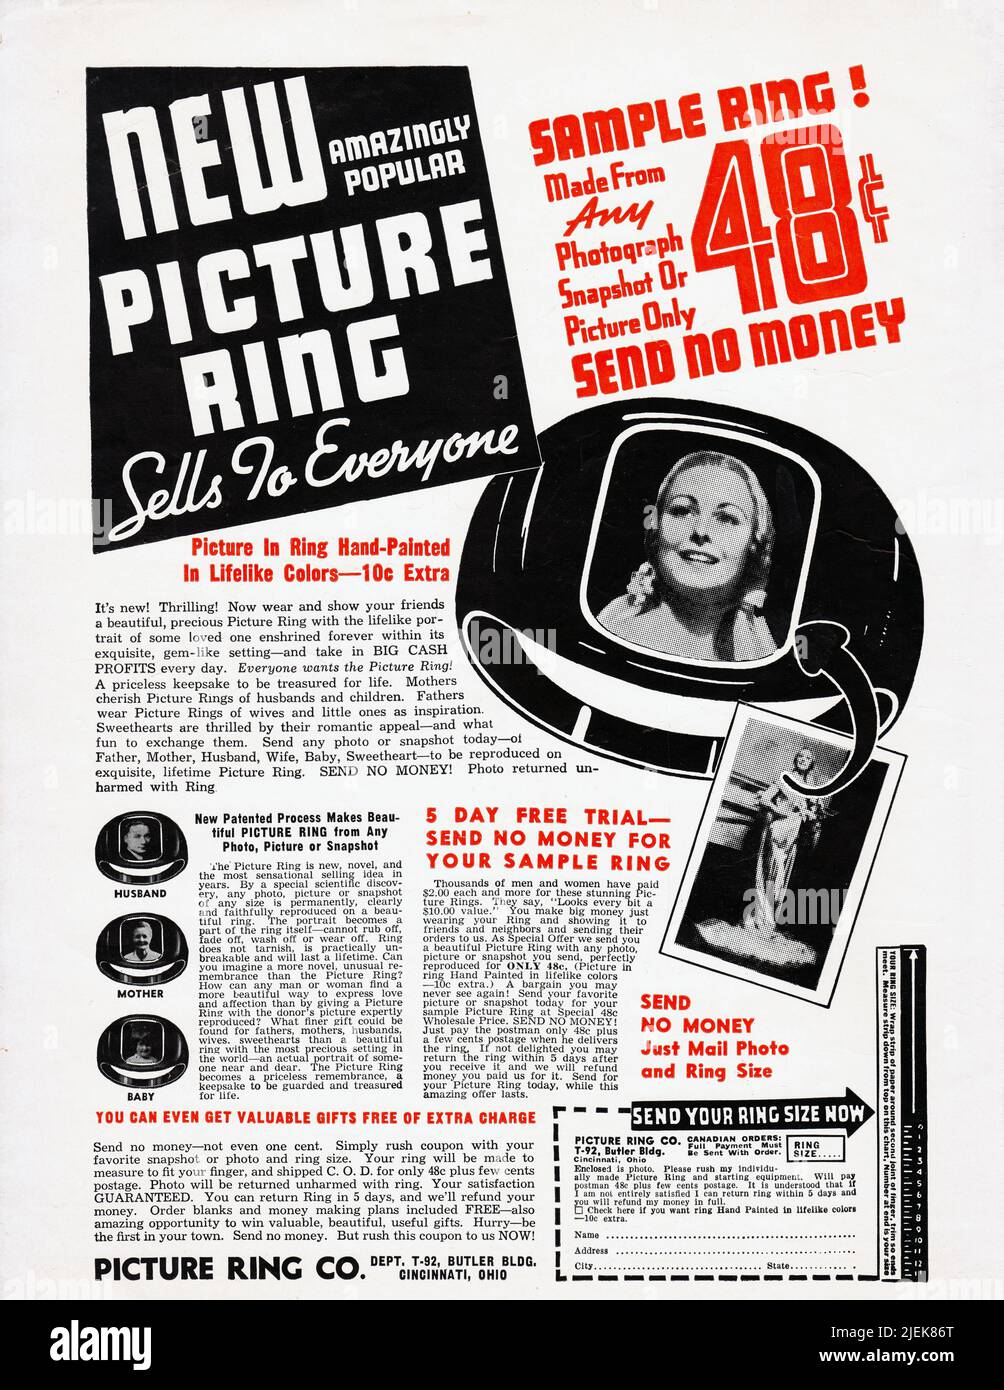 An ad for a picture ring for only 48 cents from a 1940 music magazine. 10 cents extra would get you a hand-painted photo. All with a money back guarantee. Stock Photo